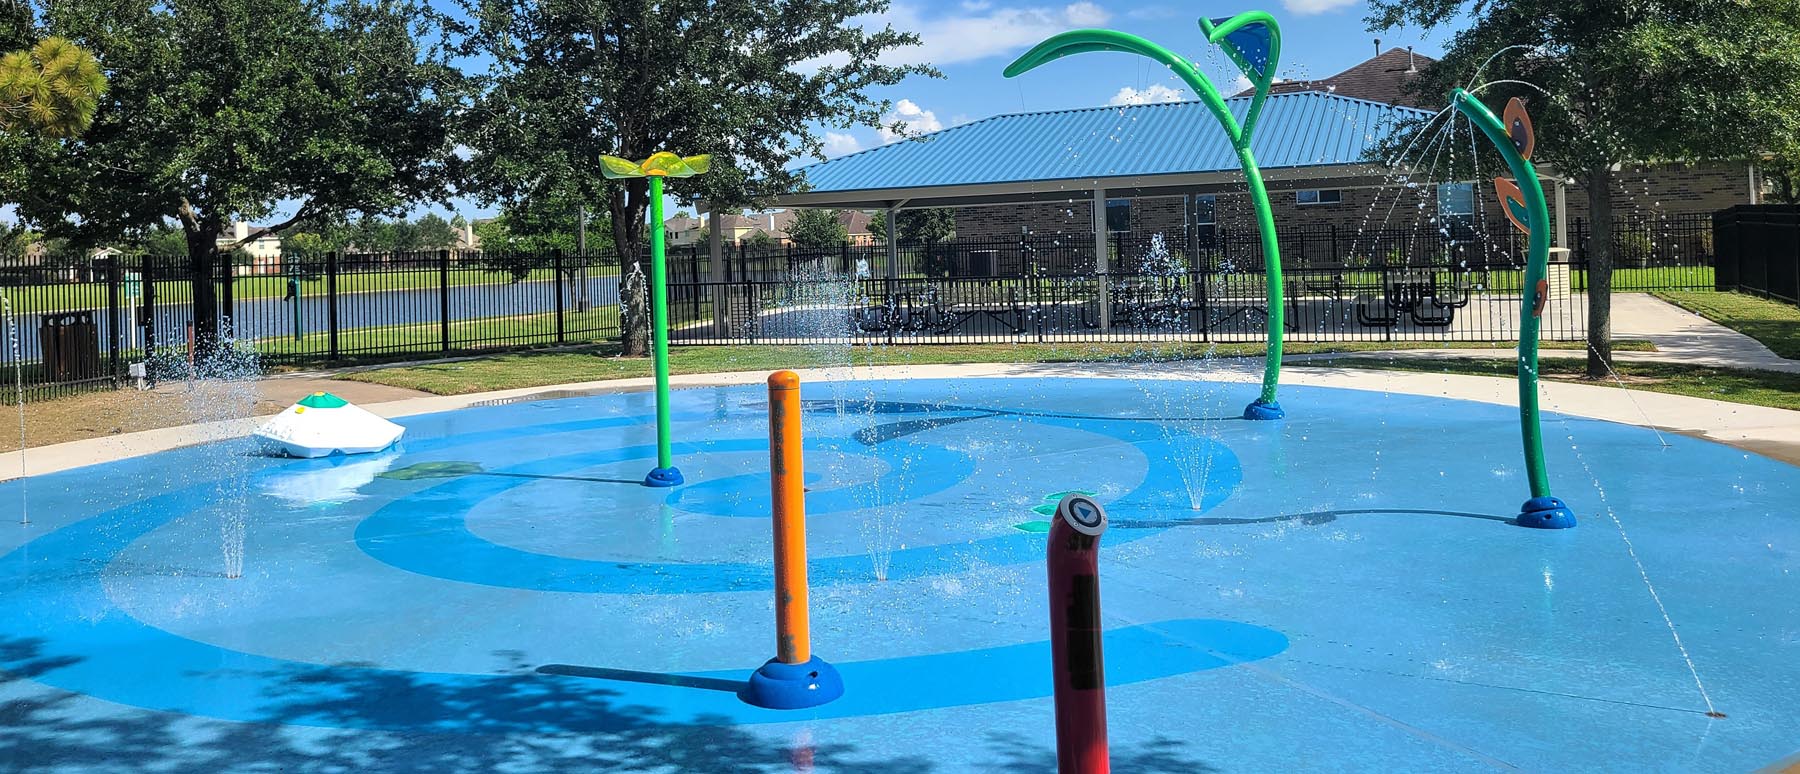 Commercial splash parks and playgrounds